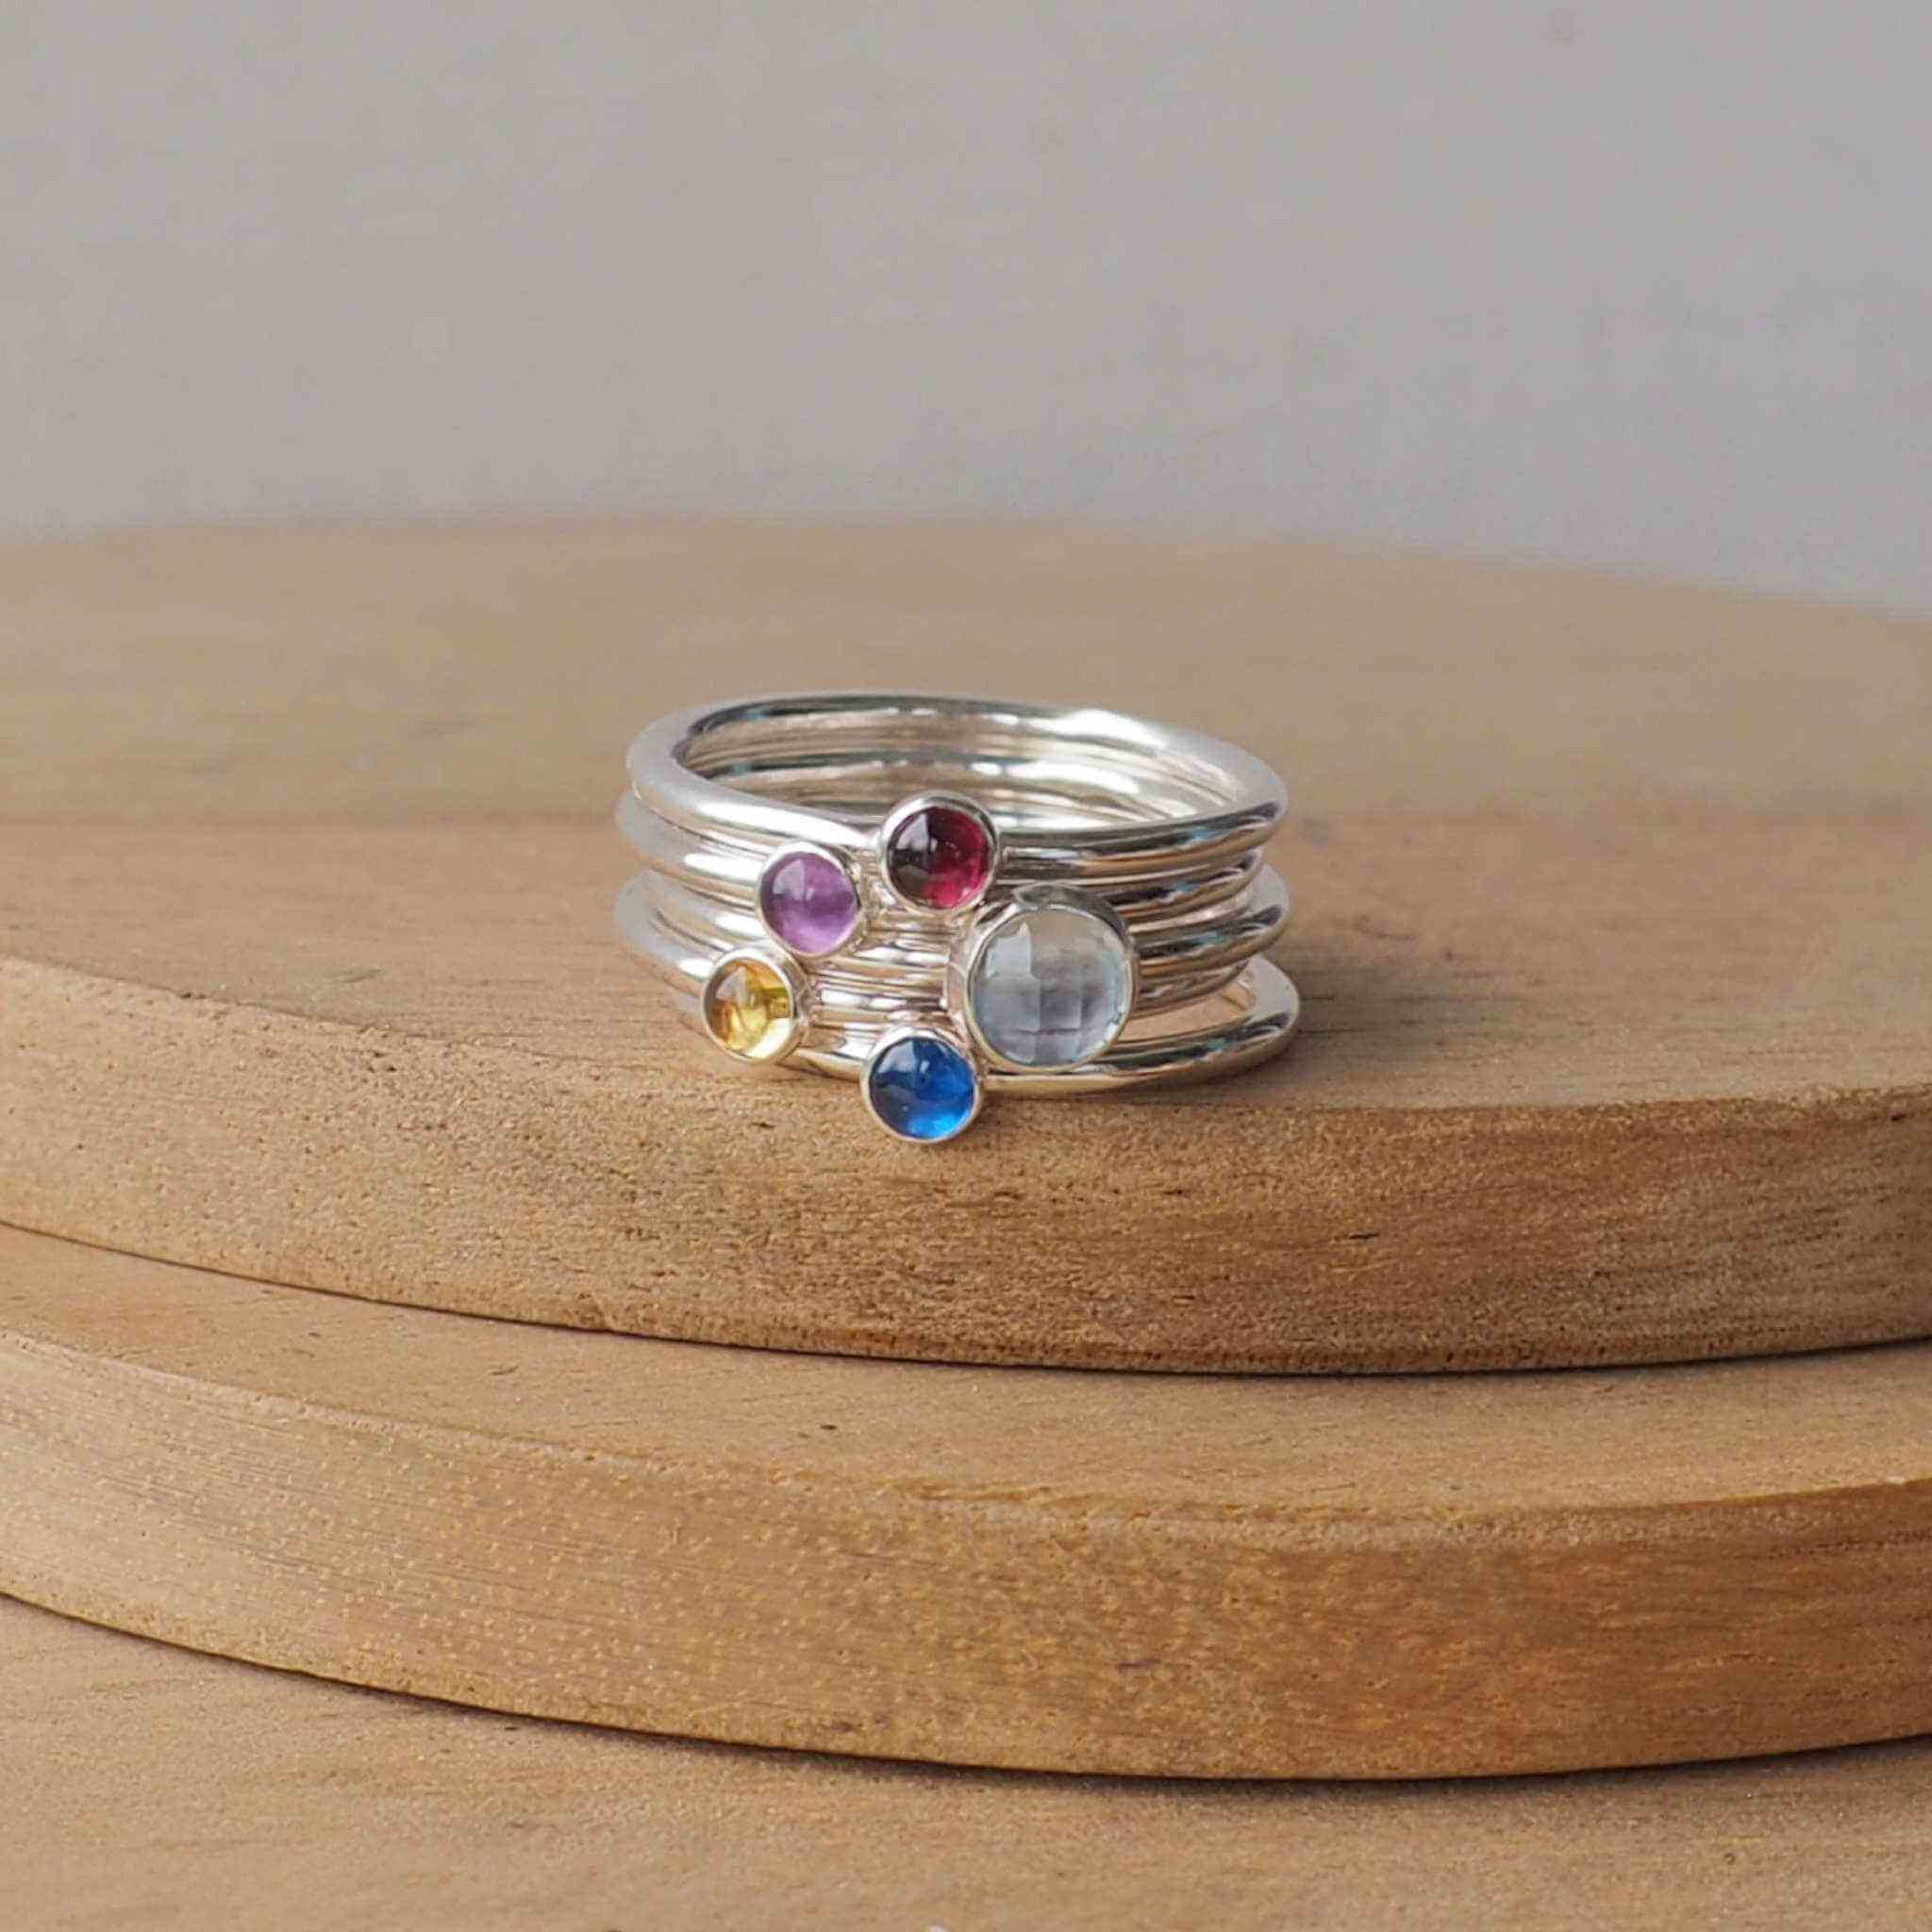 Five Ring Set with Blue Topaz, Amethyst, Lab Sapphire and Citrine and Garnet to mark March, February, September, January and November Birthdays. The five rings are made with Sterling Silver and a 5mm blue round cabochon, with three further rings with 3mm round gems in a yellow citrine, purple amethyst, red garnet and a bright blue lab sapphire. Handmade in Scotland by maram jewellery